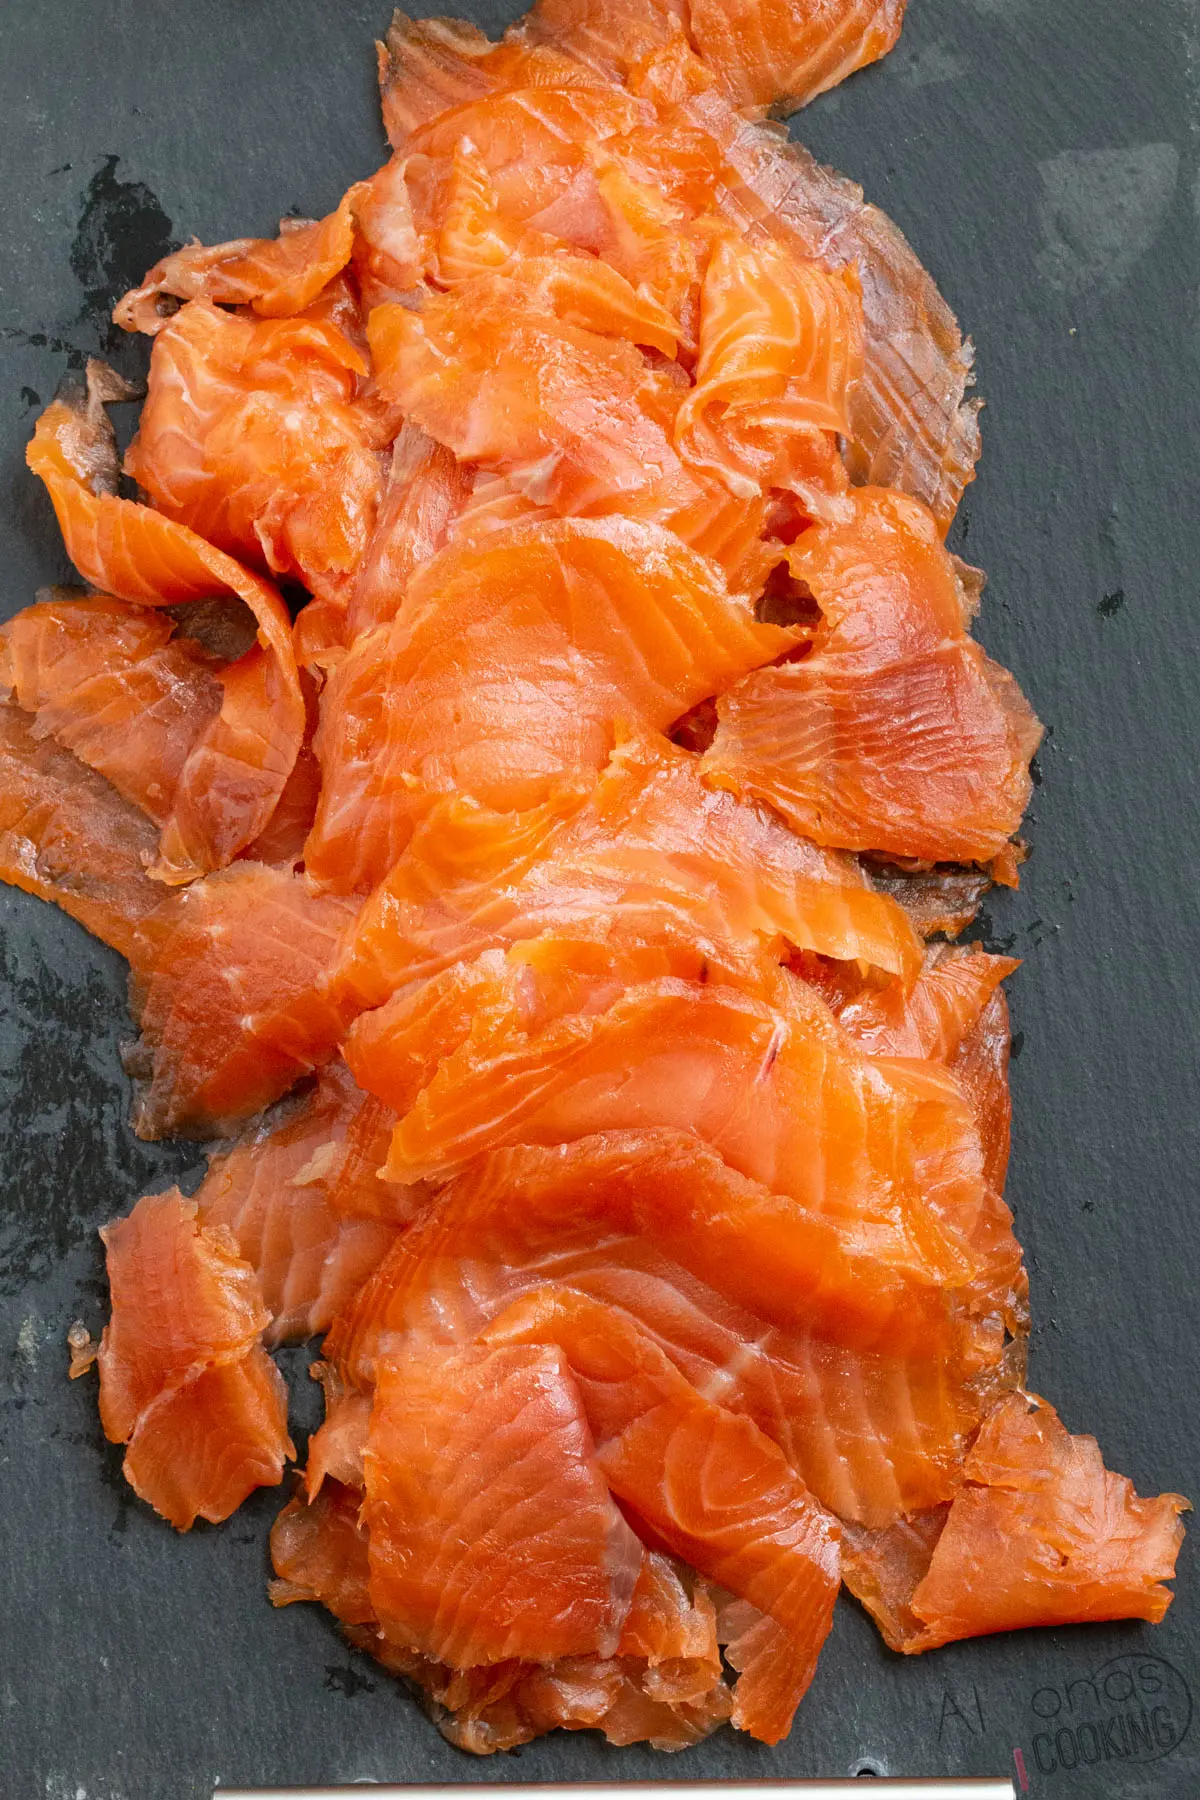 smoked salmon in costco - What kind of salmon is sold at Costco